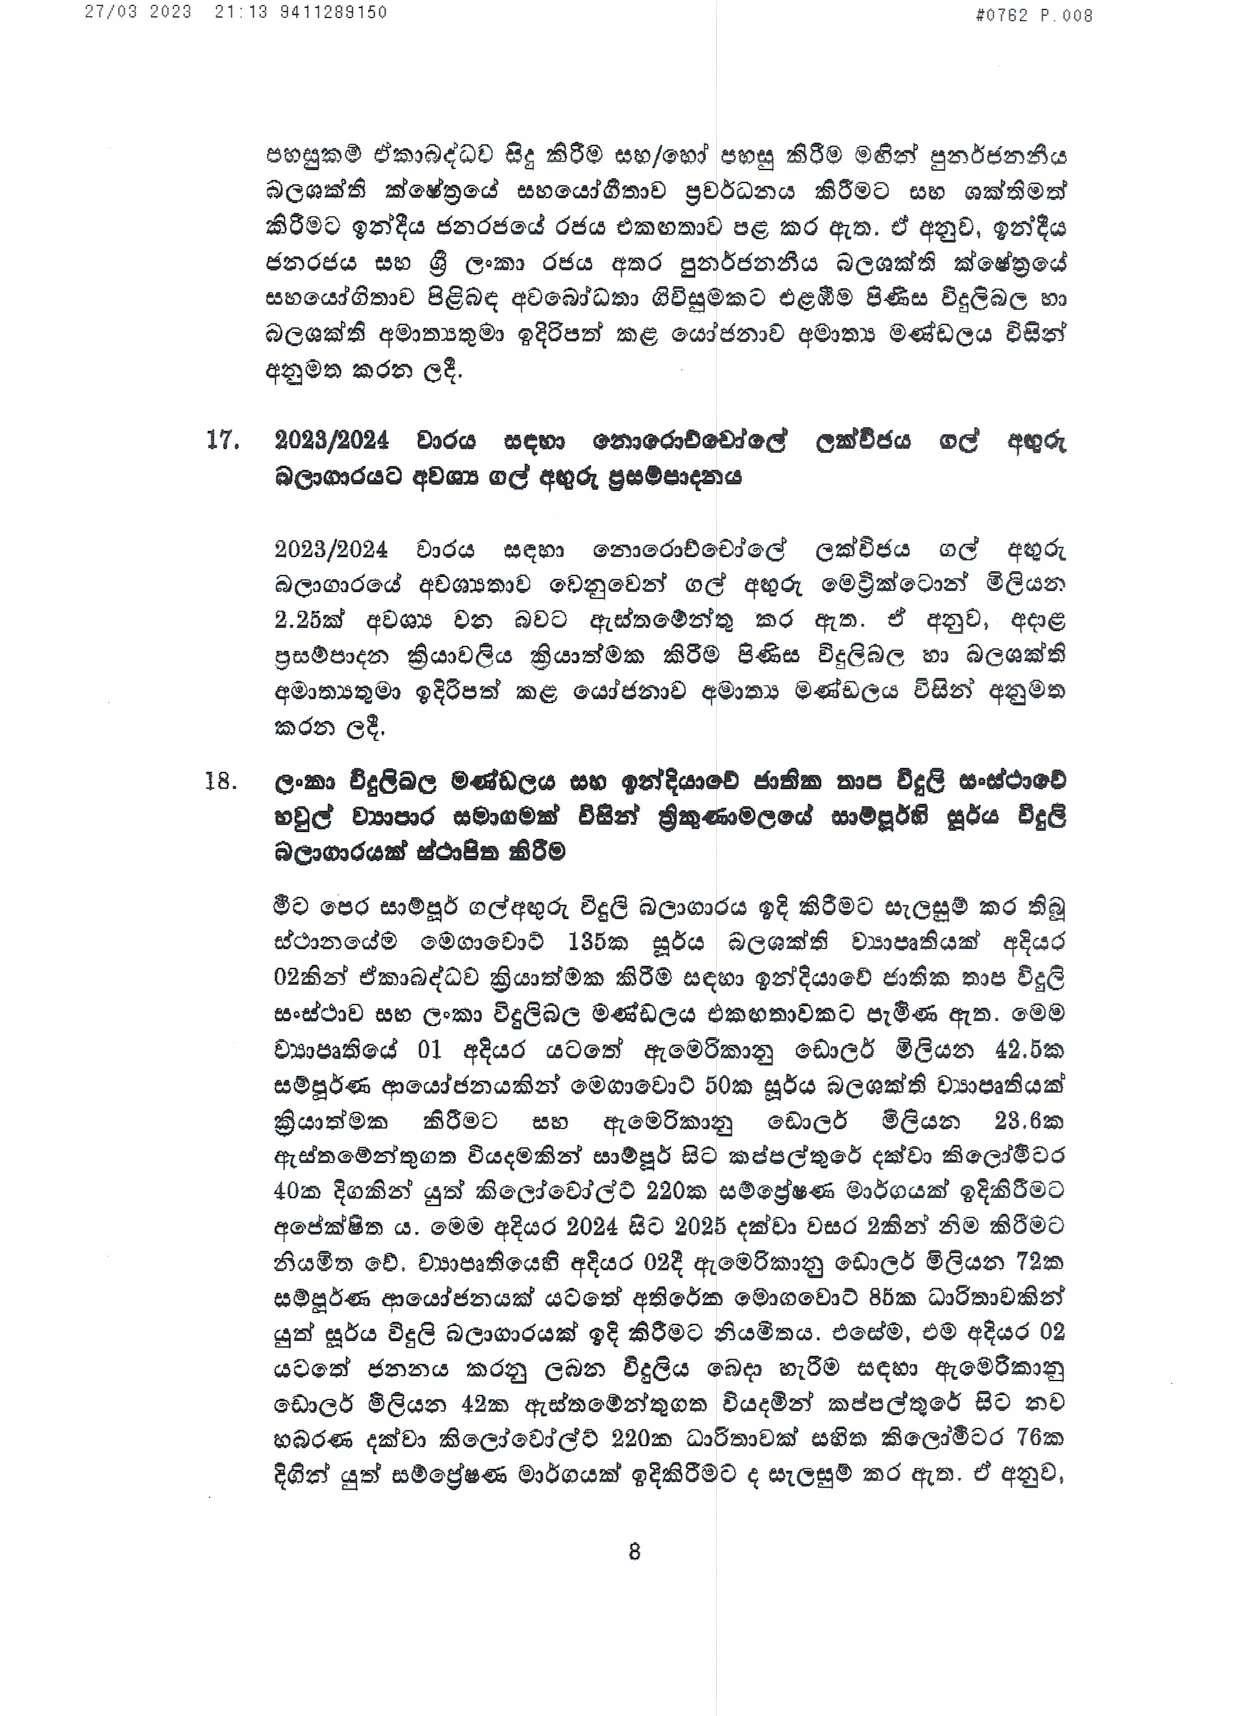 Cabinet Decision on 27.03.2023 page 008